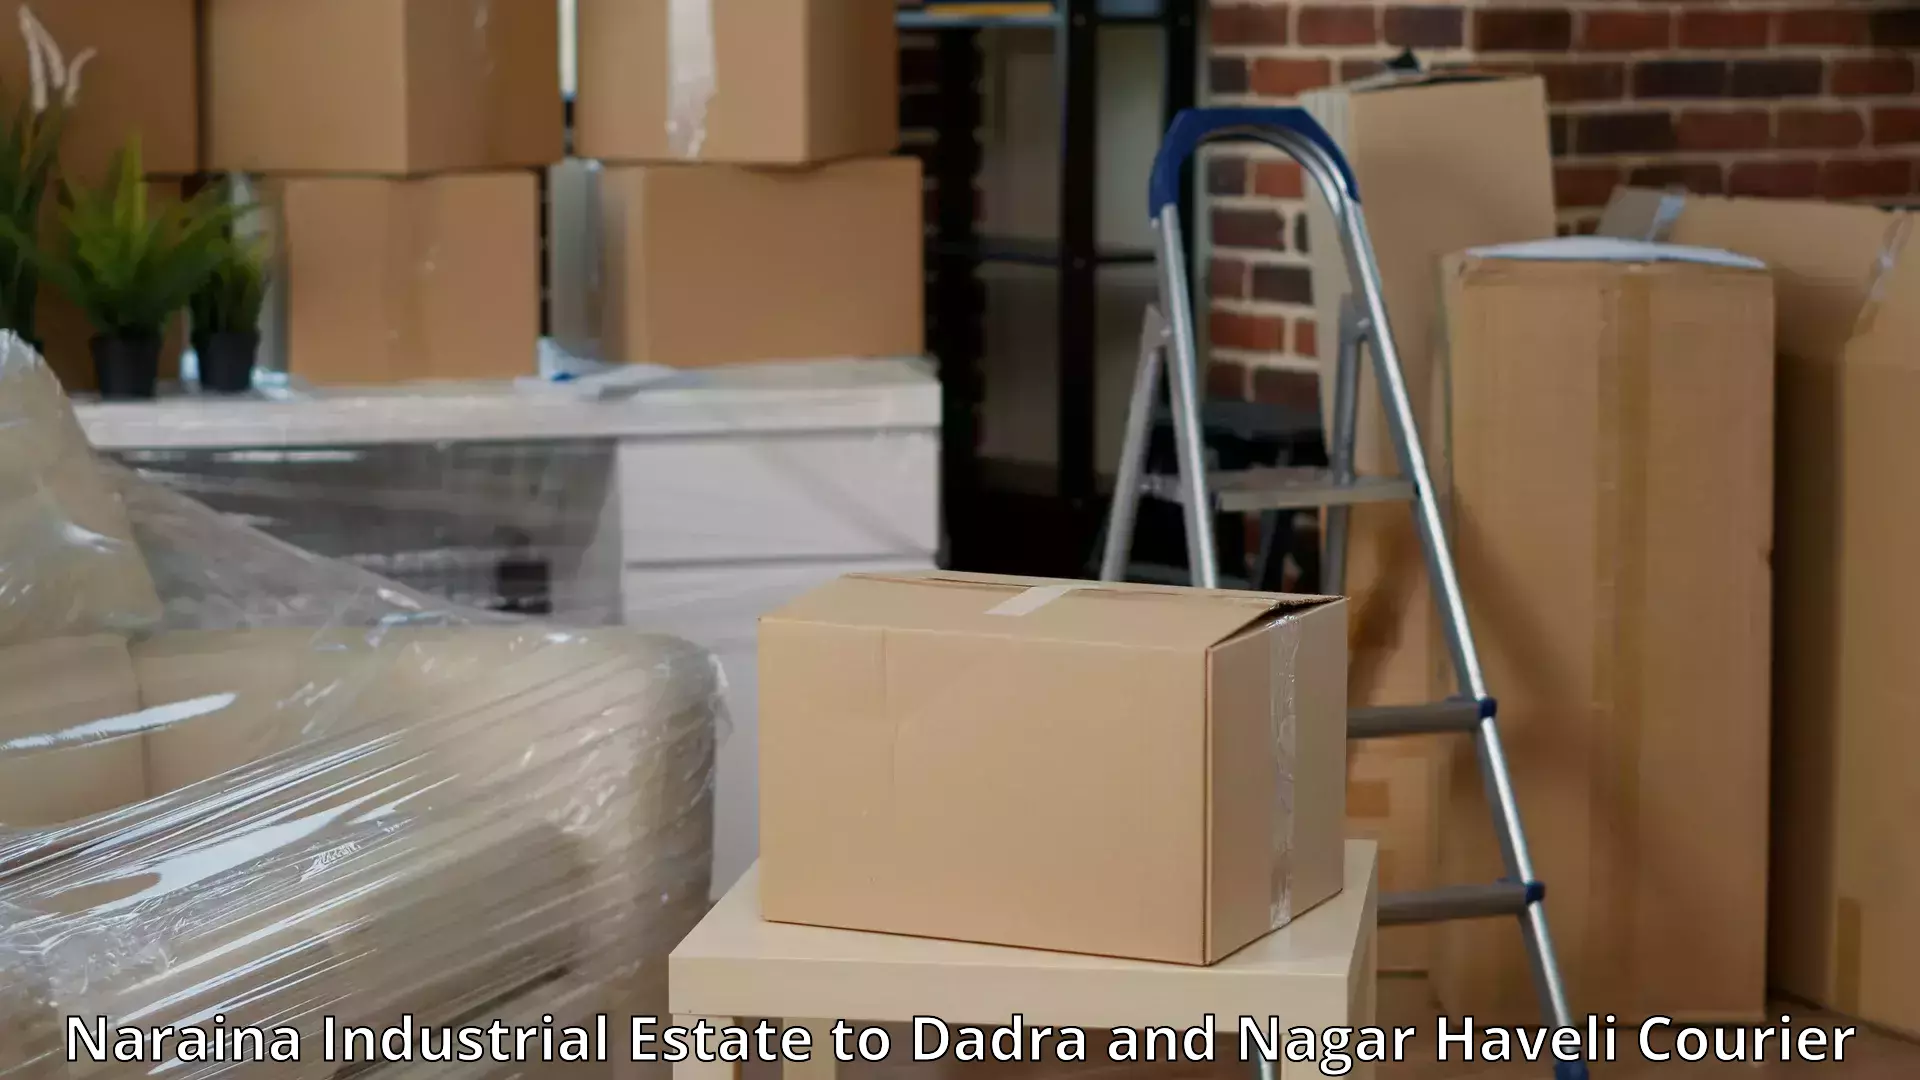 Professional packing services Naraina Industrial Estate to Dadra and Nagar Haveli